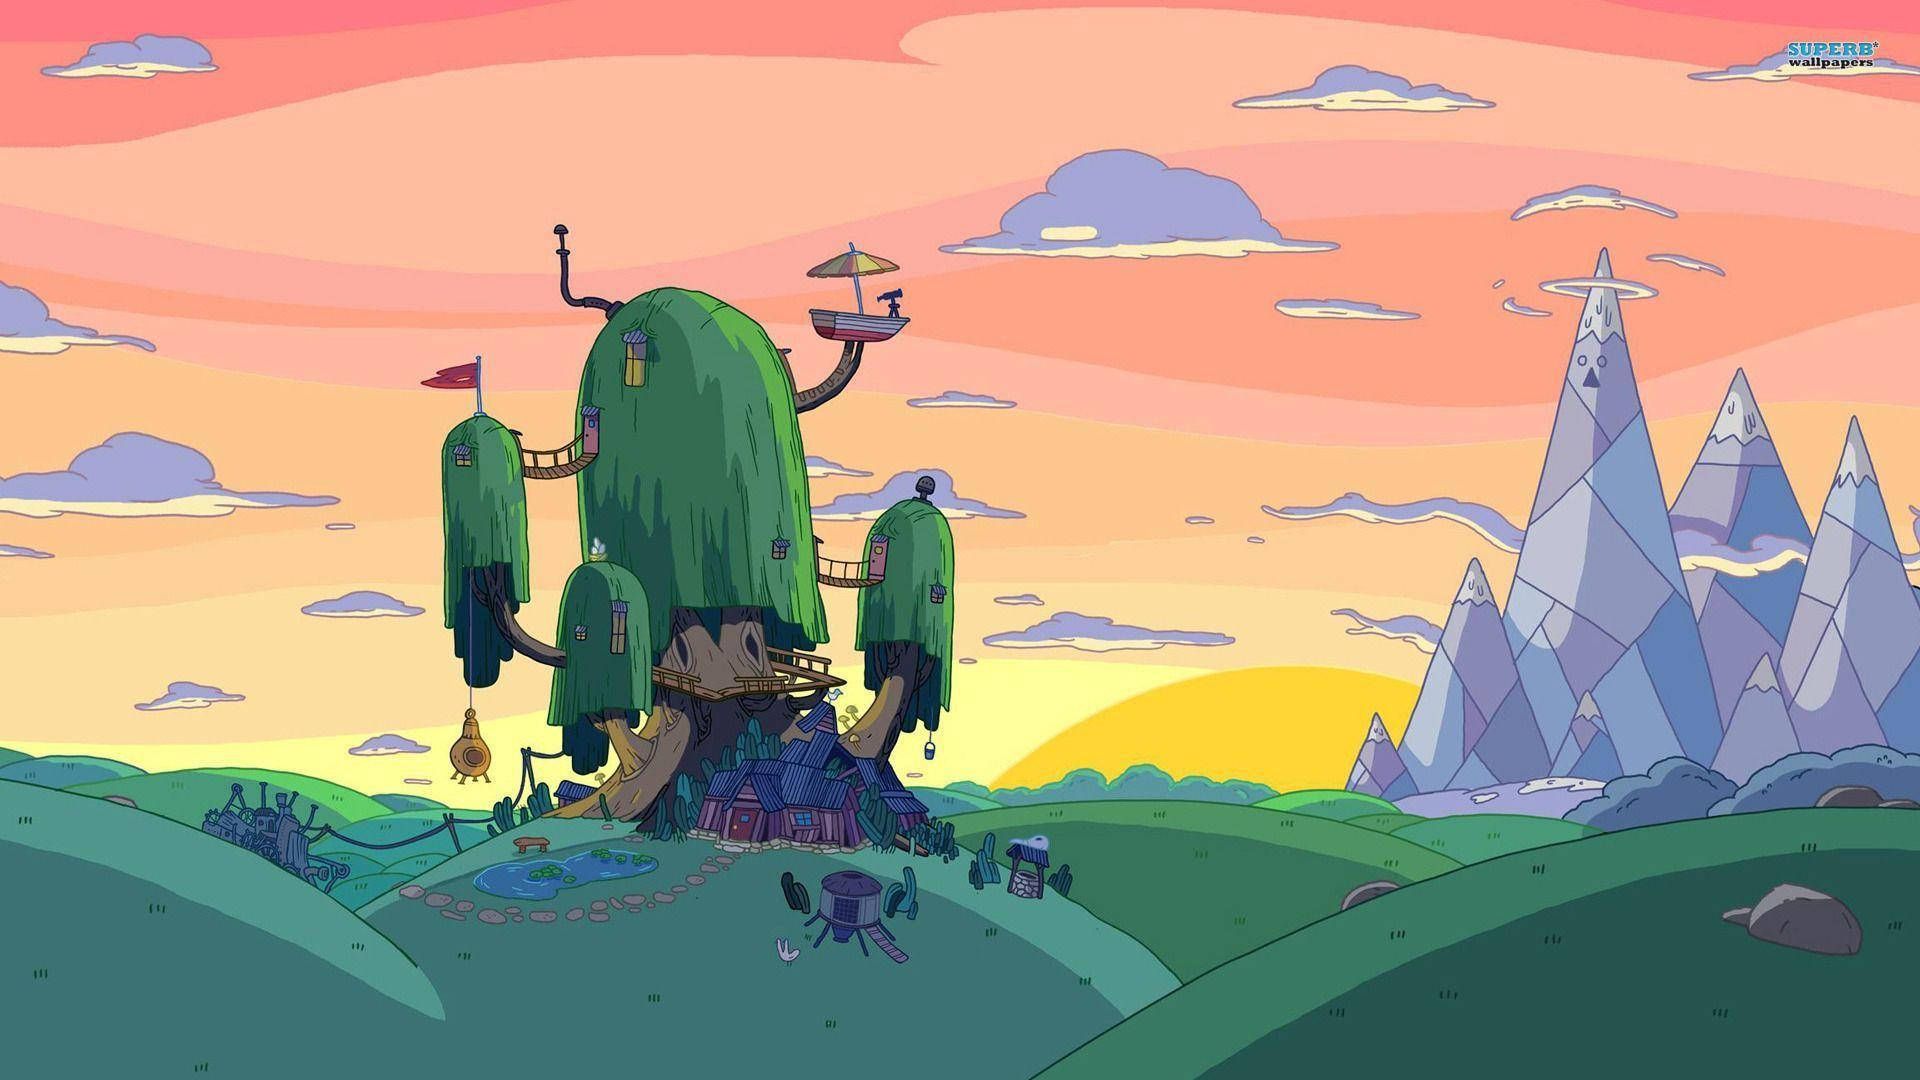 Adventure Time wallpaper 1920x1080 - Finn and Jake in the treehouse - Adventure Time